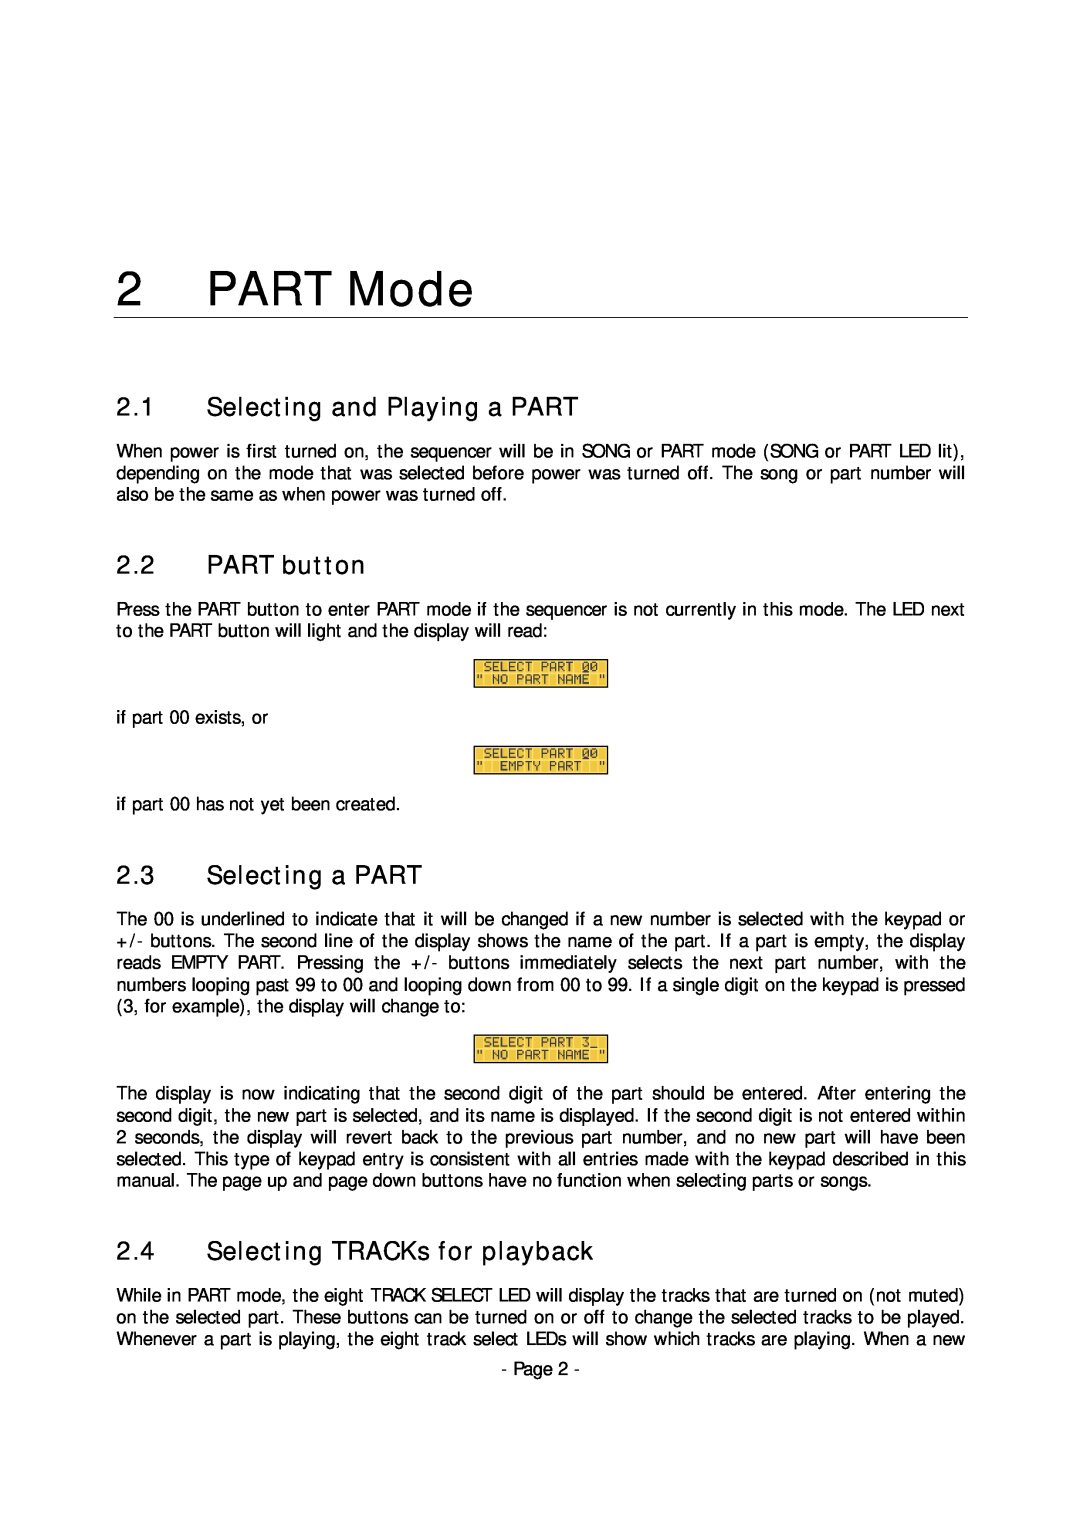 Alesis MMT-8 manual PART Mode, 2.1Selecting and Playing a PART, 2.2PART button, 2.3Selecting a PART 